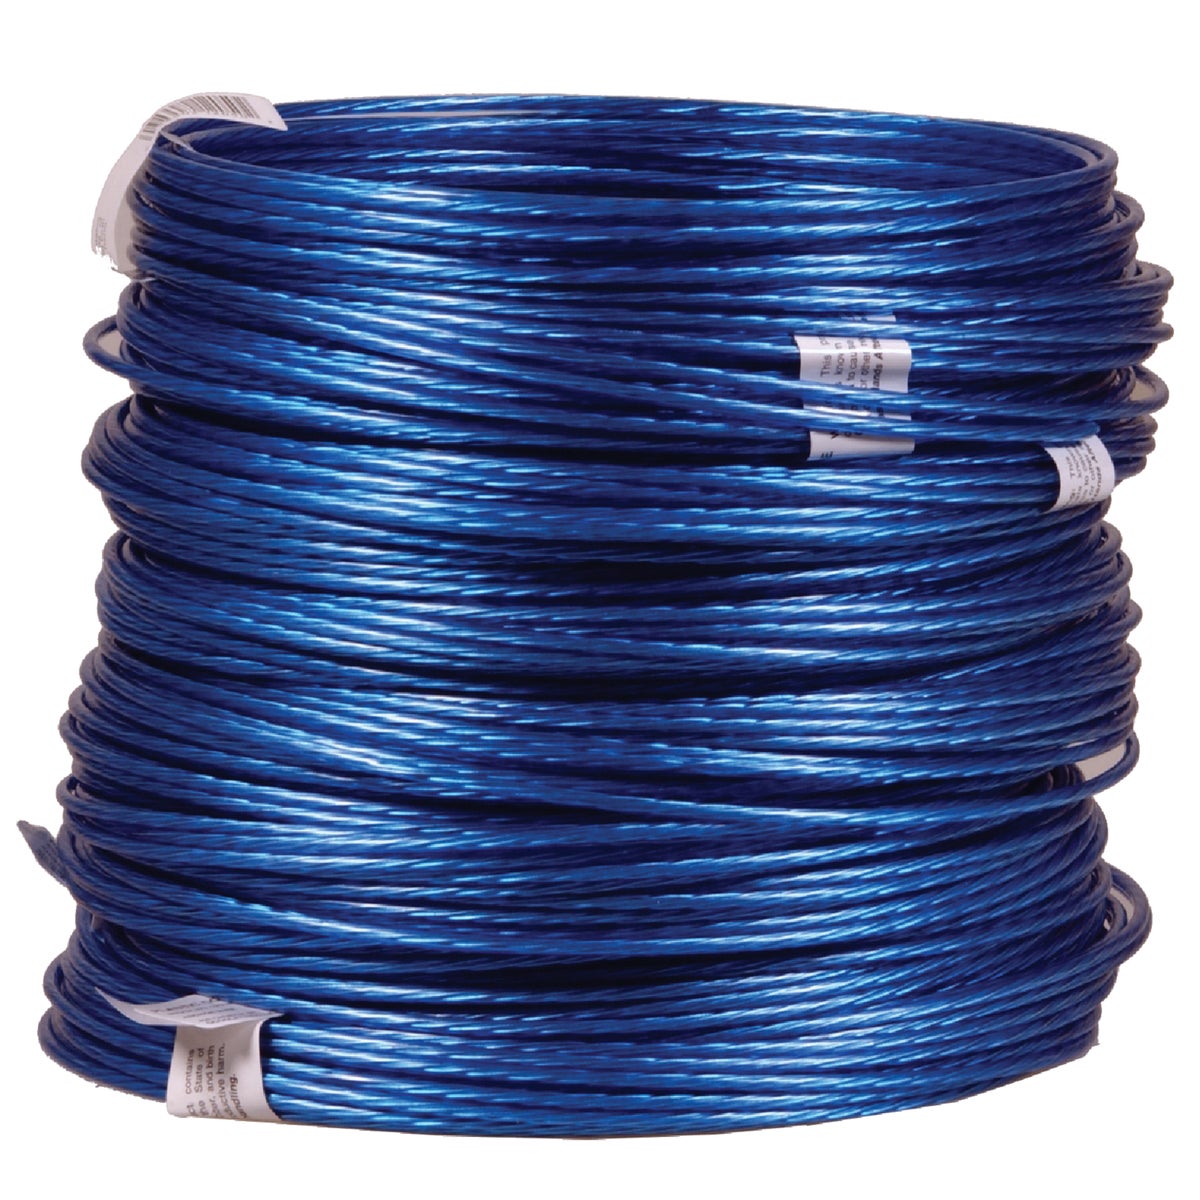 Hillman Anchor Wire 50 Ft. 9 Ga. Plastic-Coated Galvanized Steel Guy and Clothesline General Purpose Wire